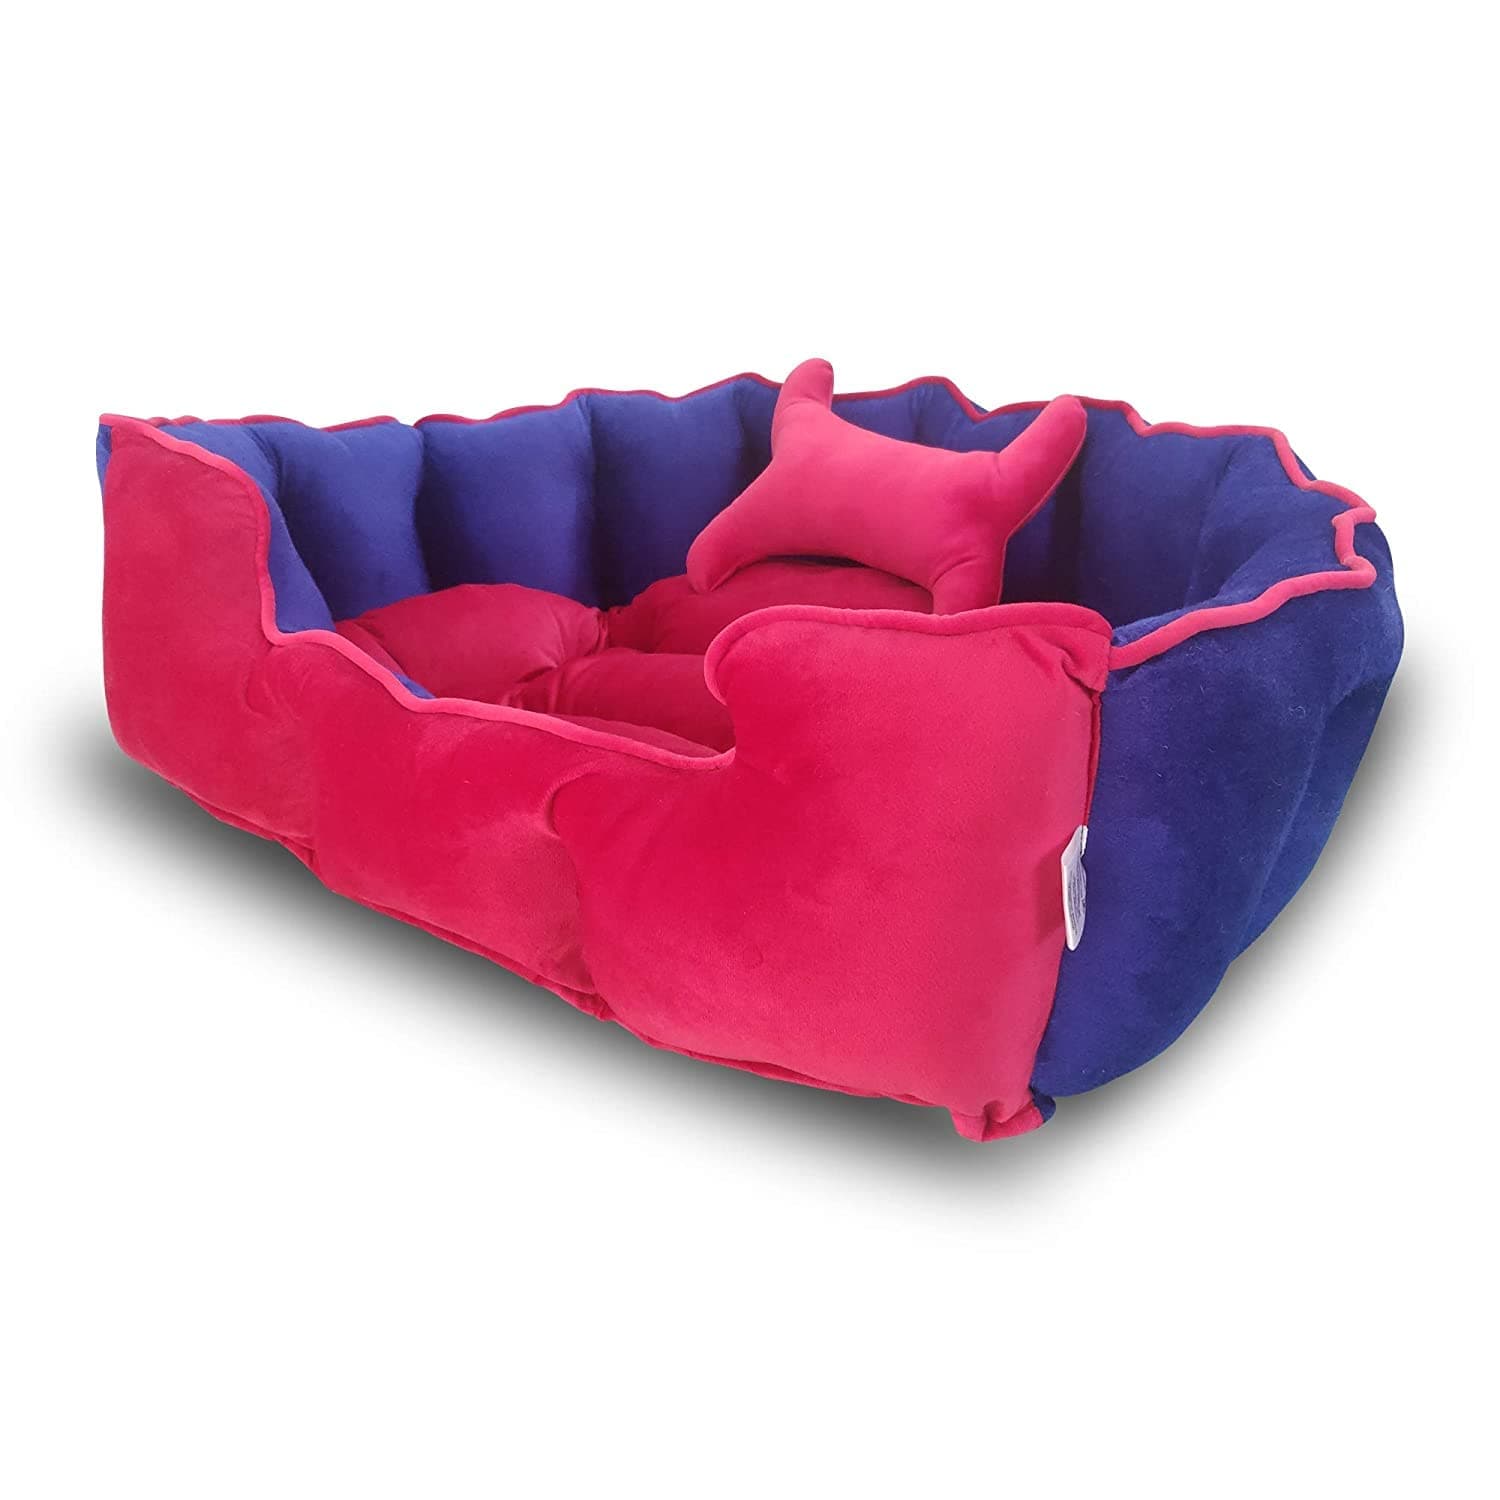 Hiputee Reversible Holland Velvet Bed for Dogs and Cats (Pink, Blue)